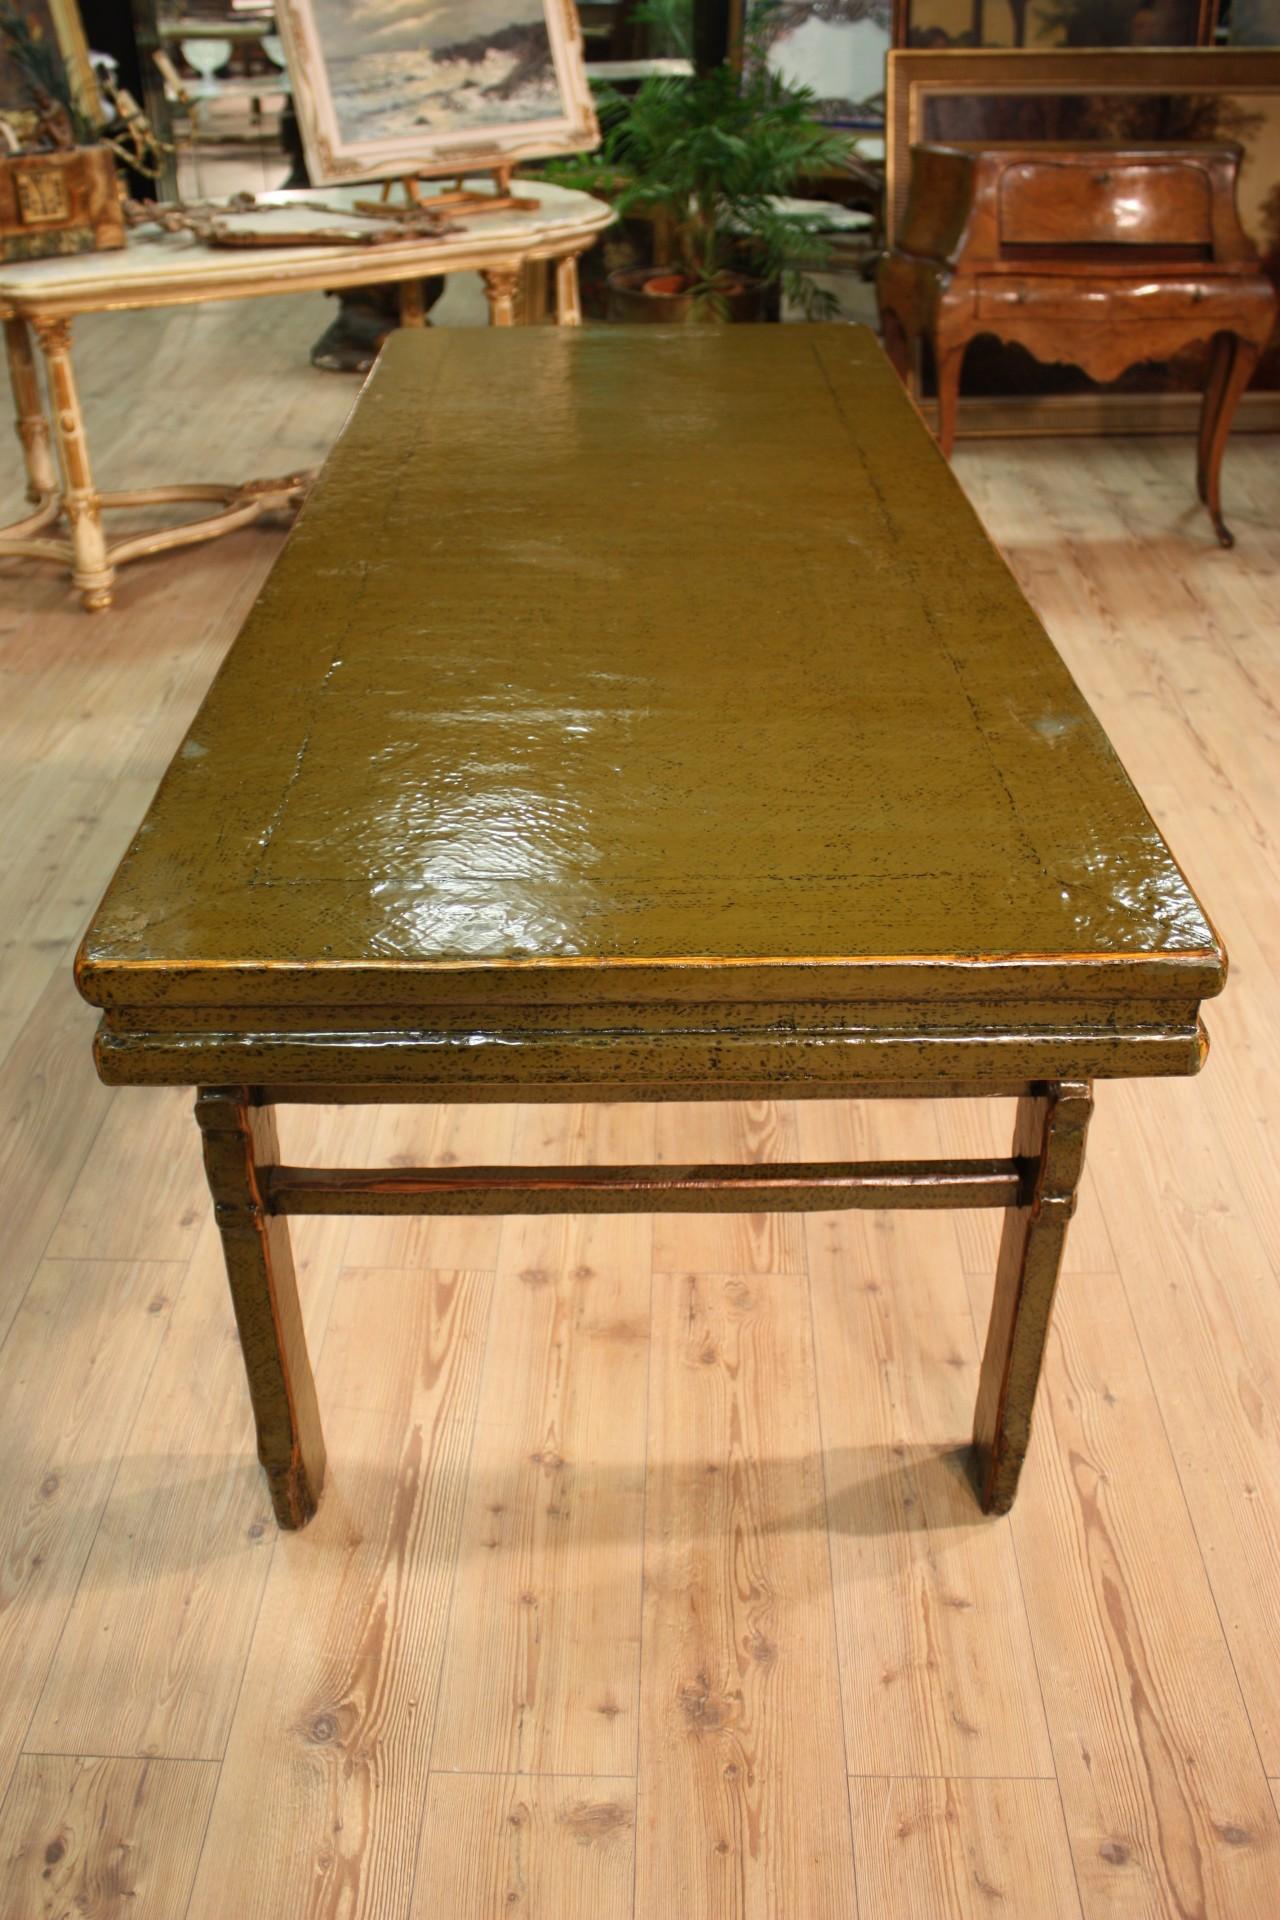 Large wooden table lacquered of the 20th century. Chinese furniture of great service, ideal for a dining room. Table with a beautiful line, easily inserted in modern or ancient contexts. In good condition, it has some signs of wear.